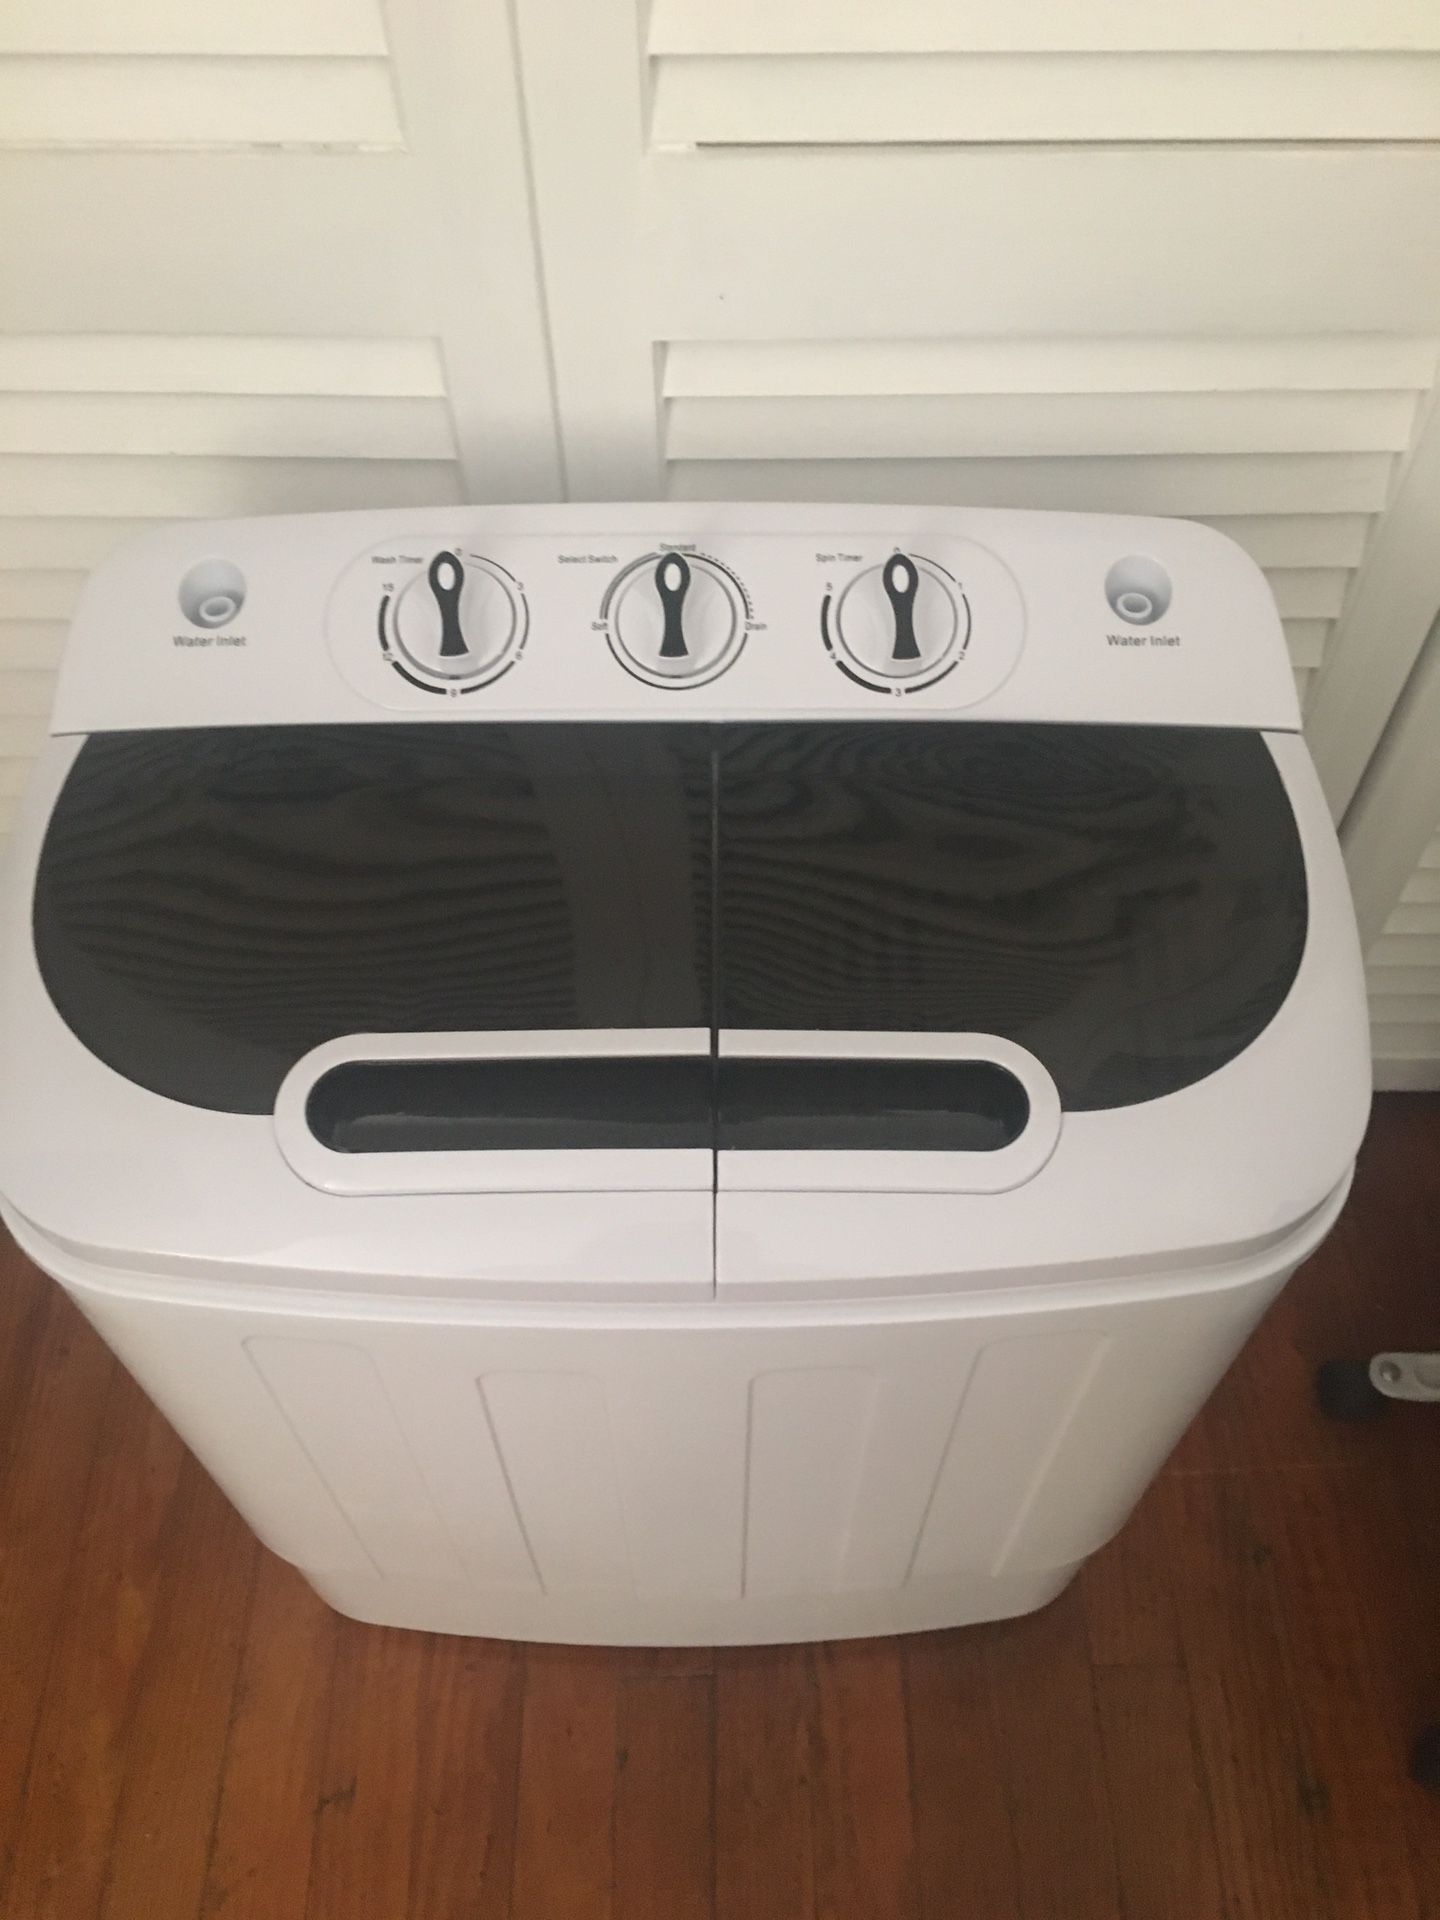 Zeny Portable Washing Machine for Sale in Fort Lauderdale, FL - OfferUp